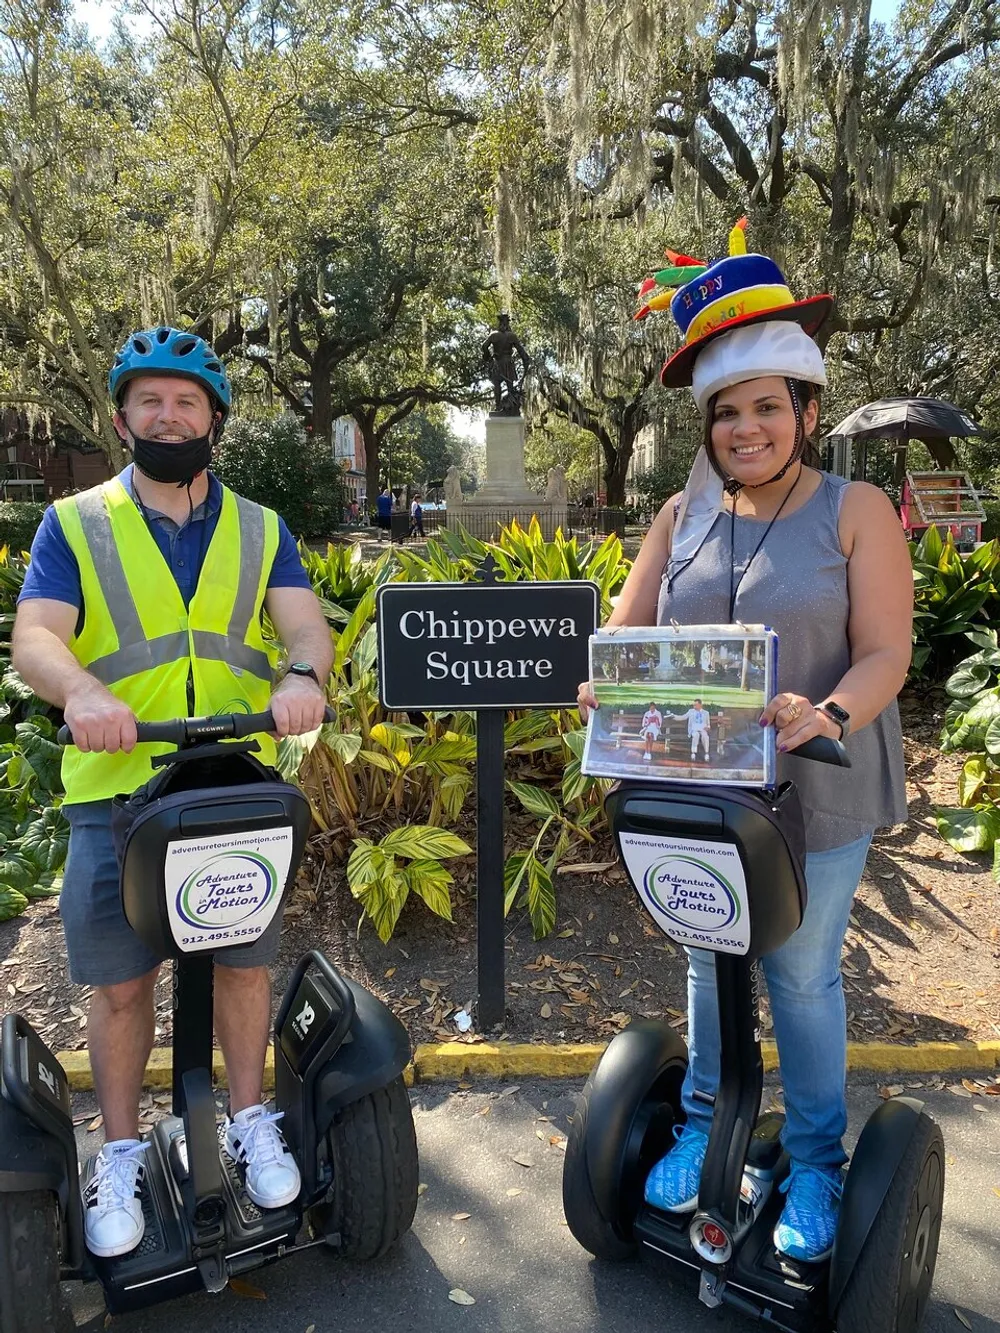 Two individuals are smiling for a photo while standing on Segways at Chippewa Square with the woman wearing a festive hat and holding a sign and the man wearing a safety vest and helmet